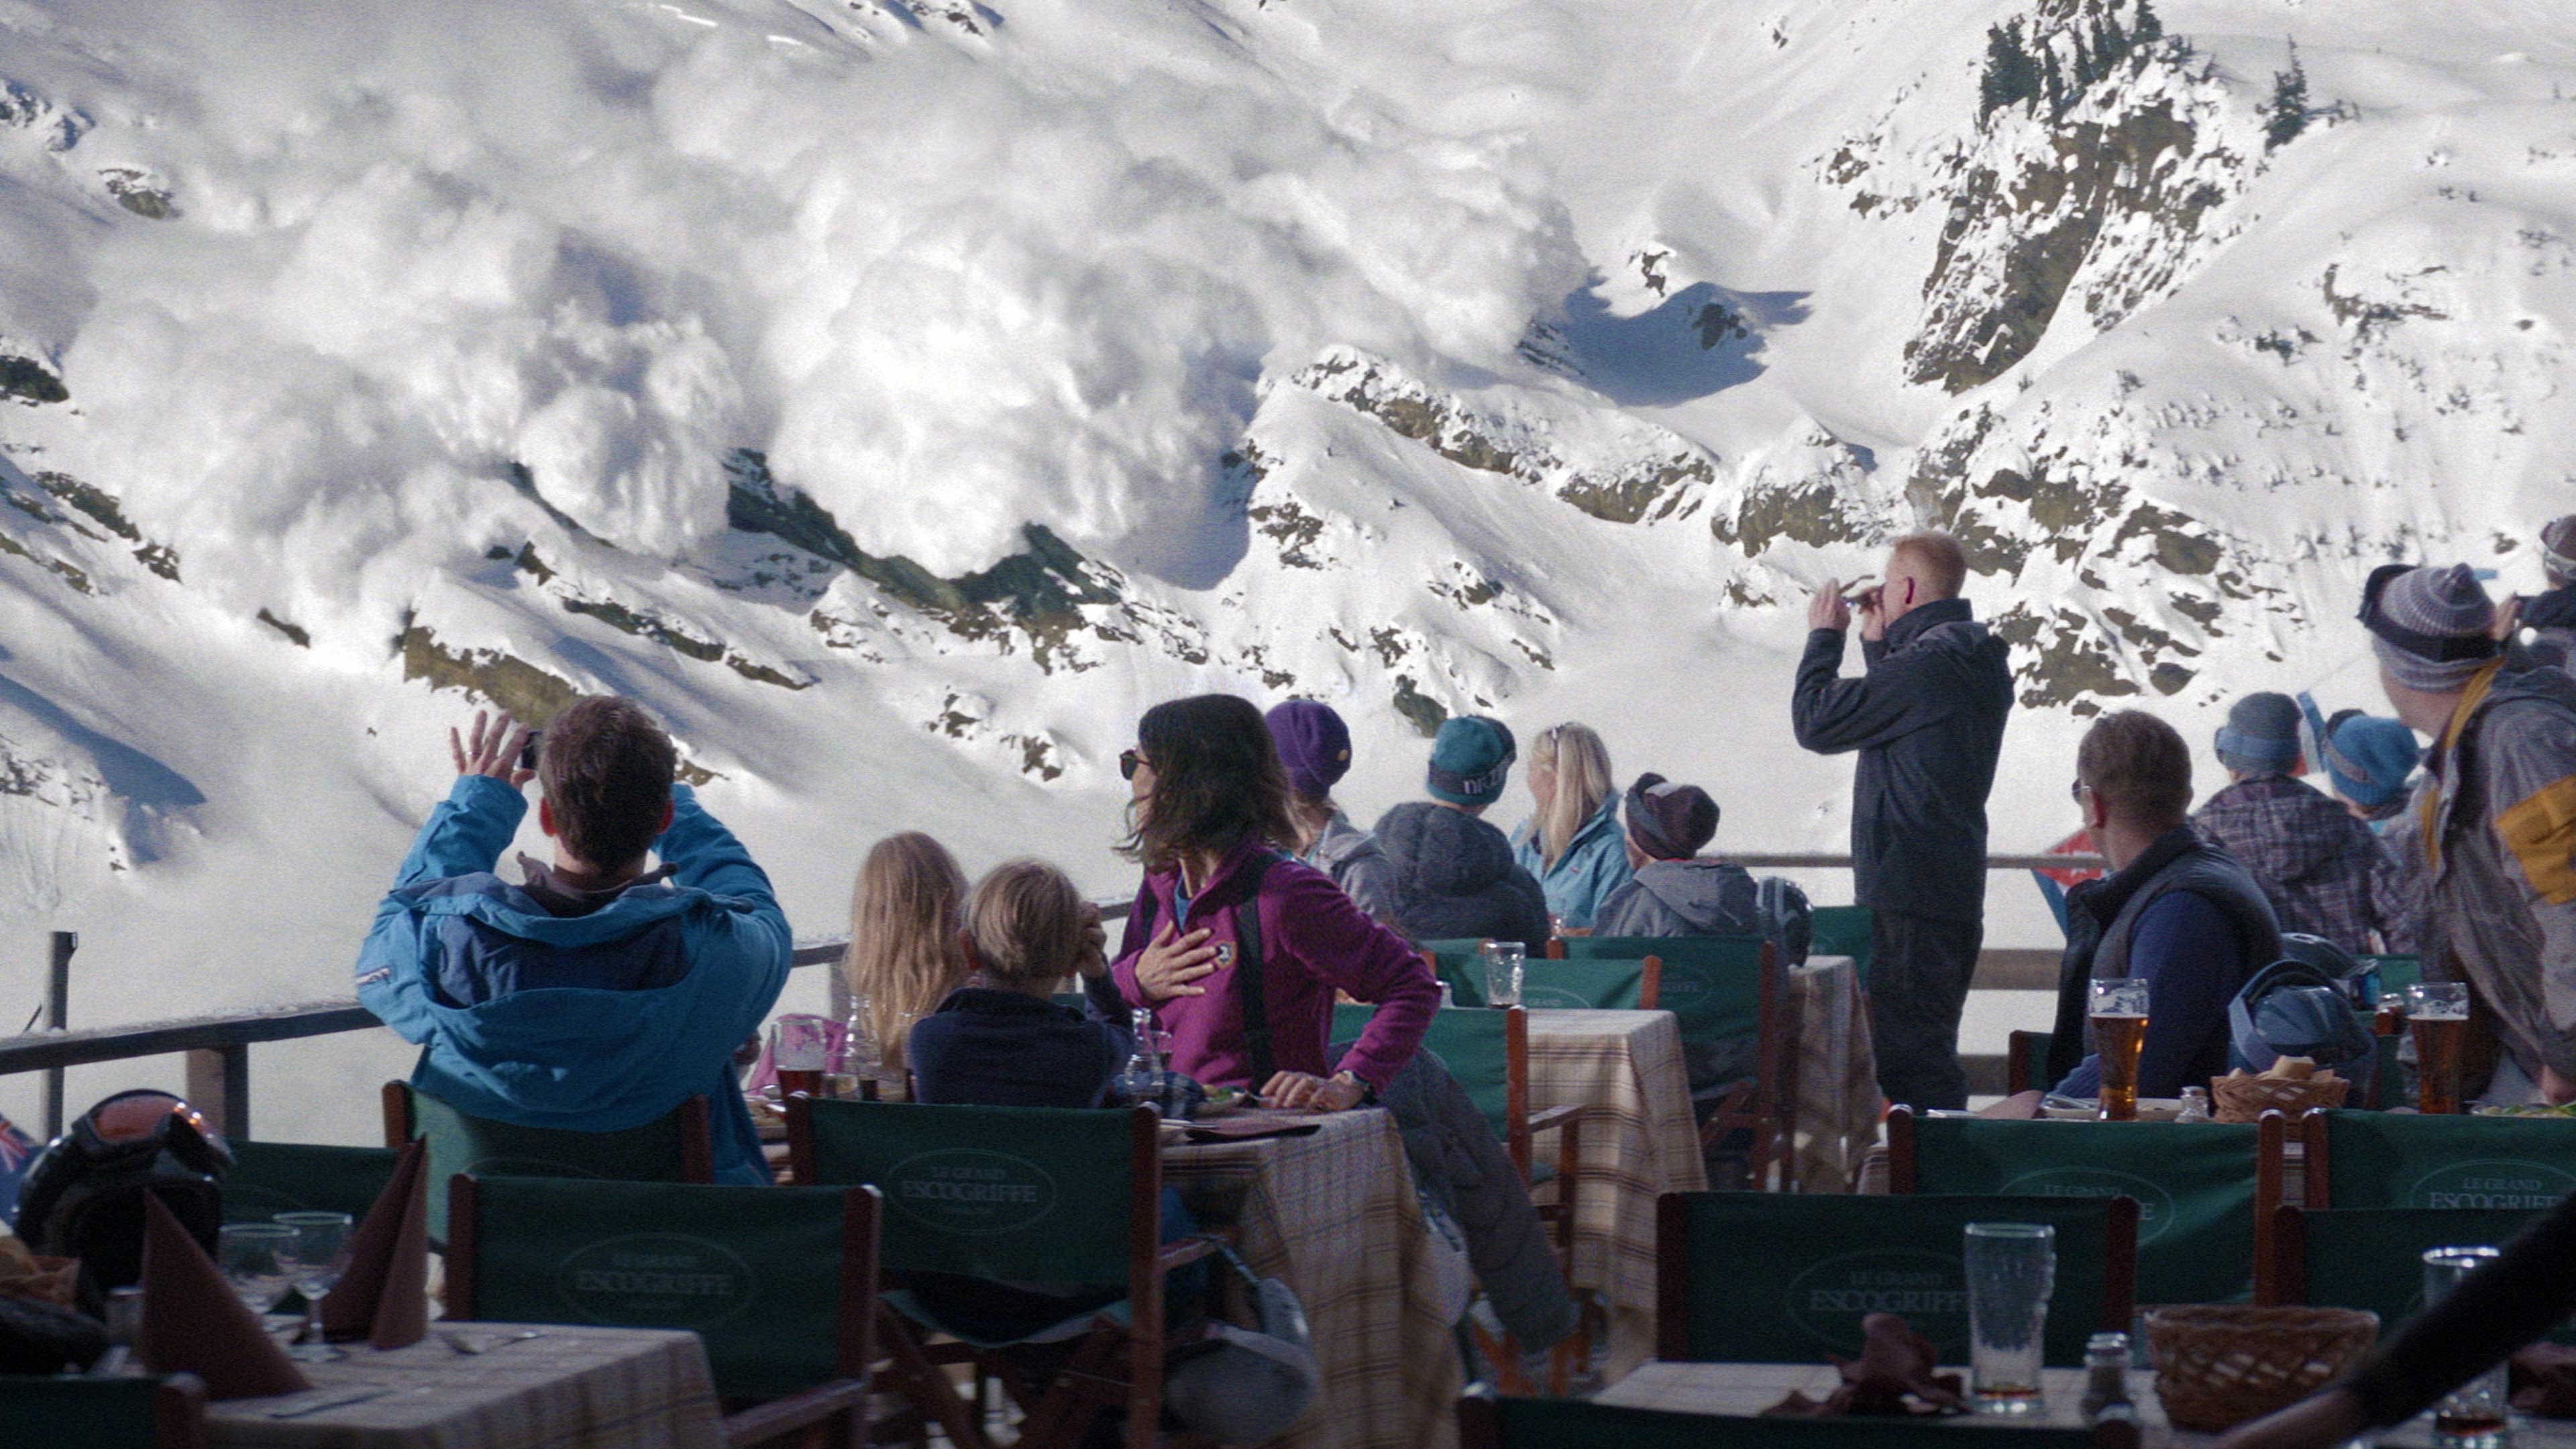 Force Majeure 2014 123movies